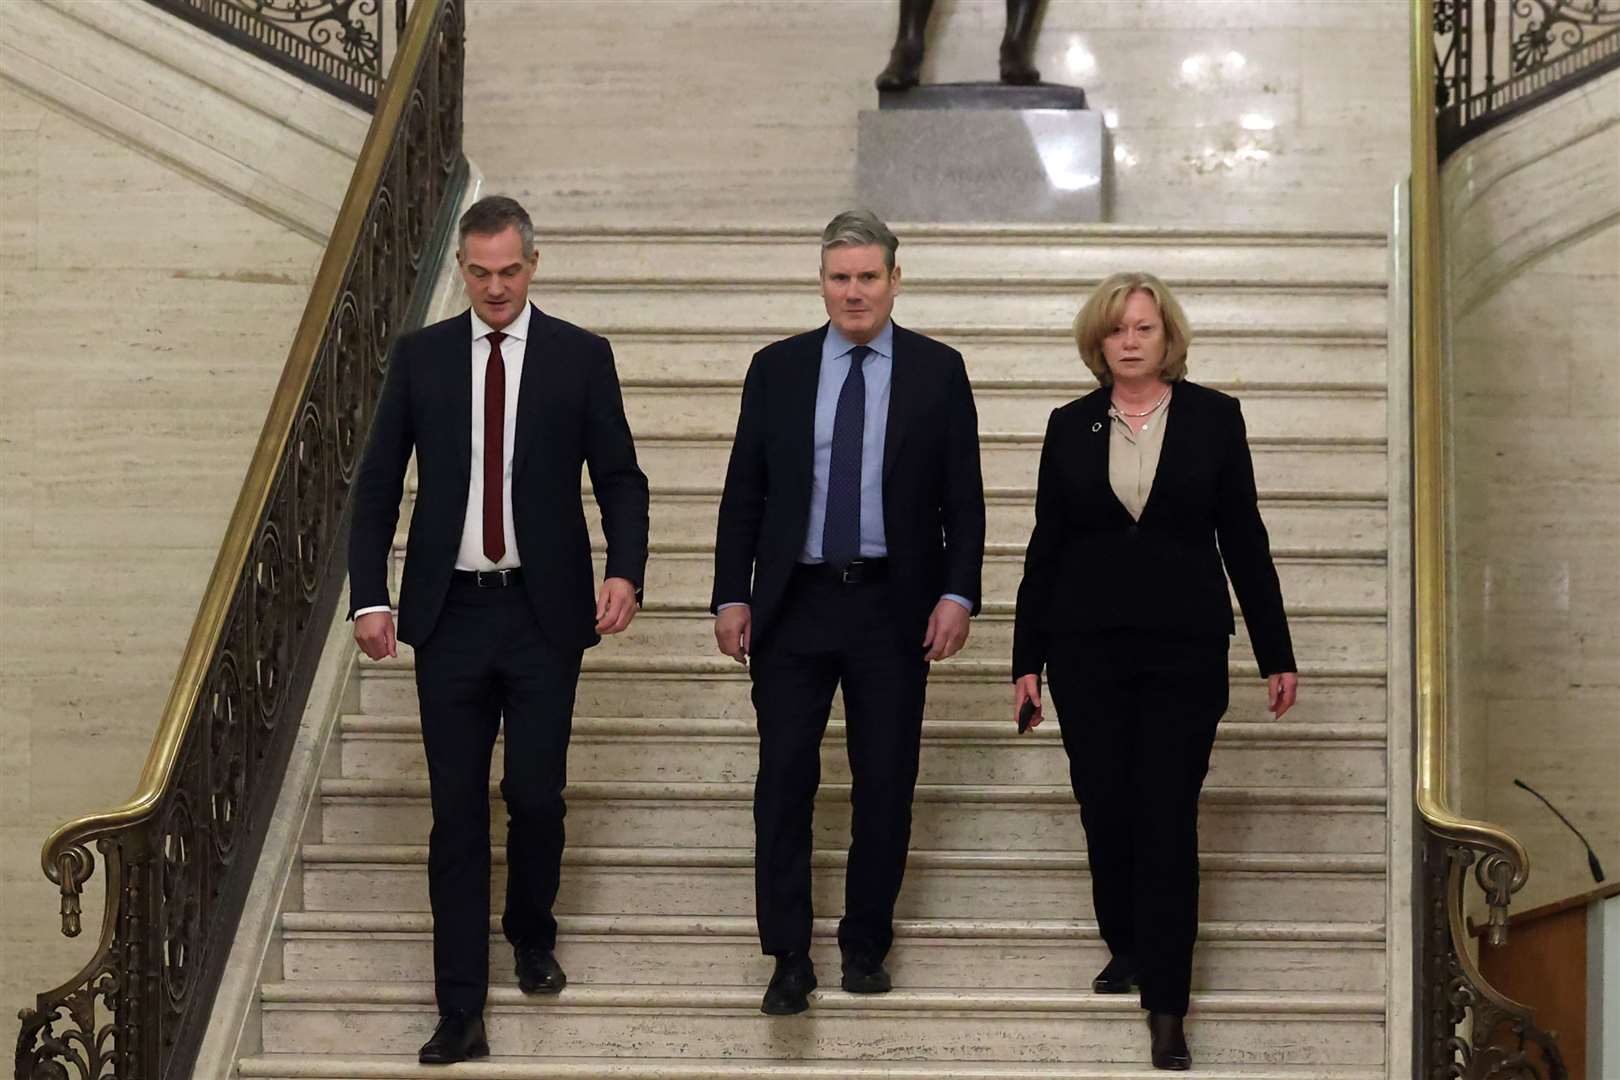 Peter Kyle, Sir Keir Starmer and shadow leader of the House of Lords Baroness Angela Smith at Stormont (Liam McBurney/PA